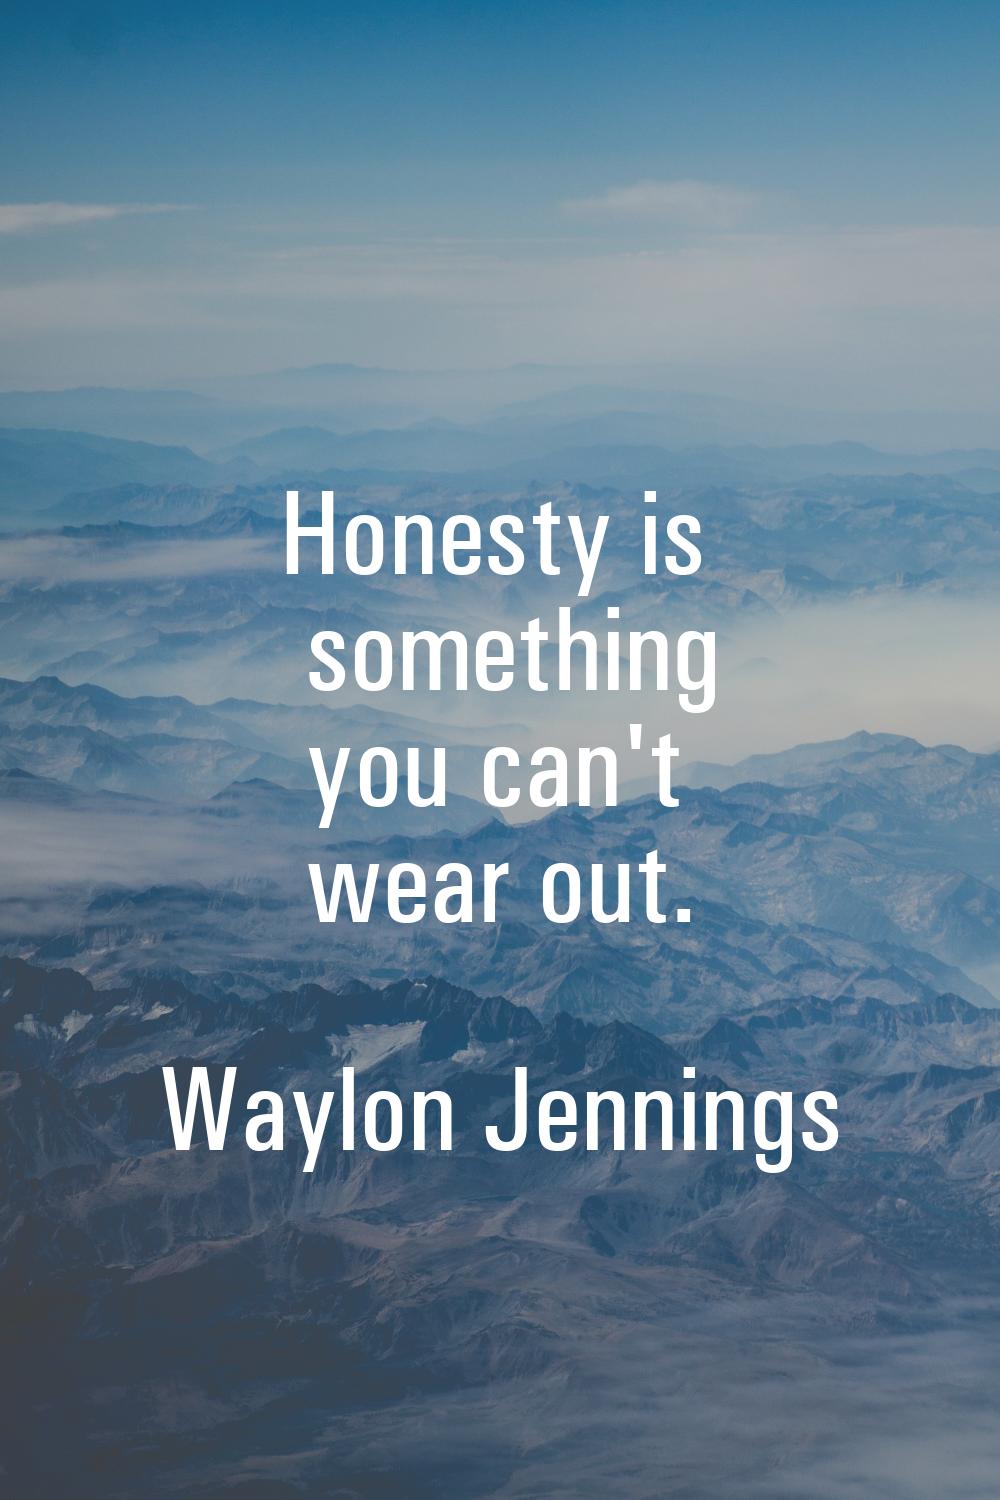 Honesty is something you can't wear out.